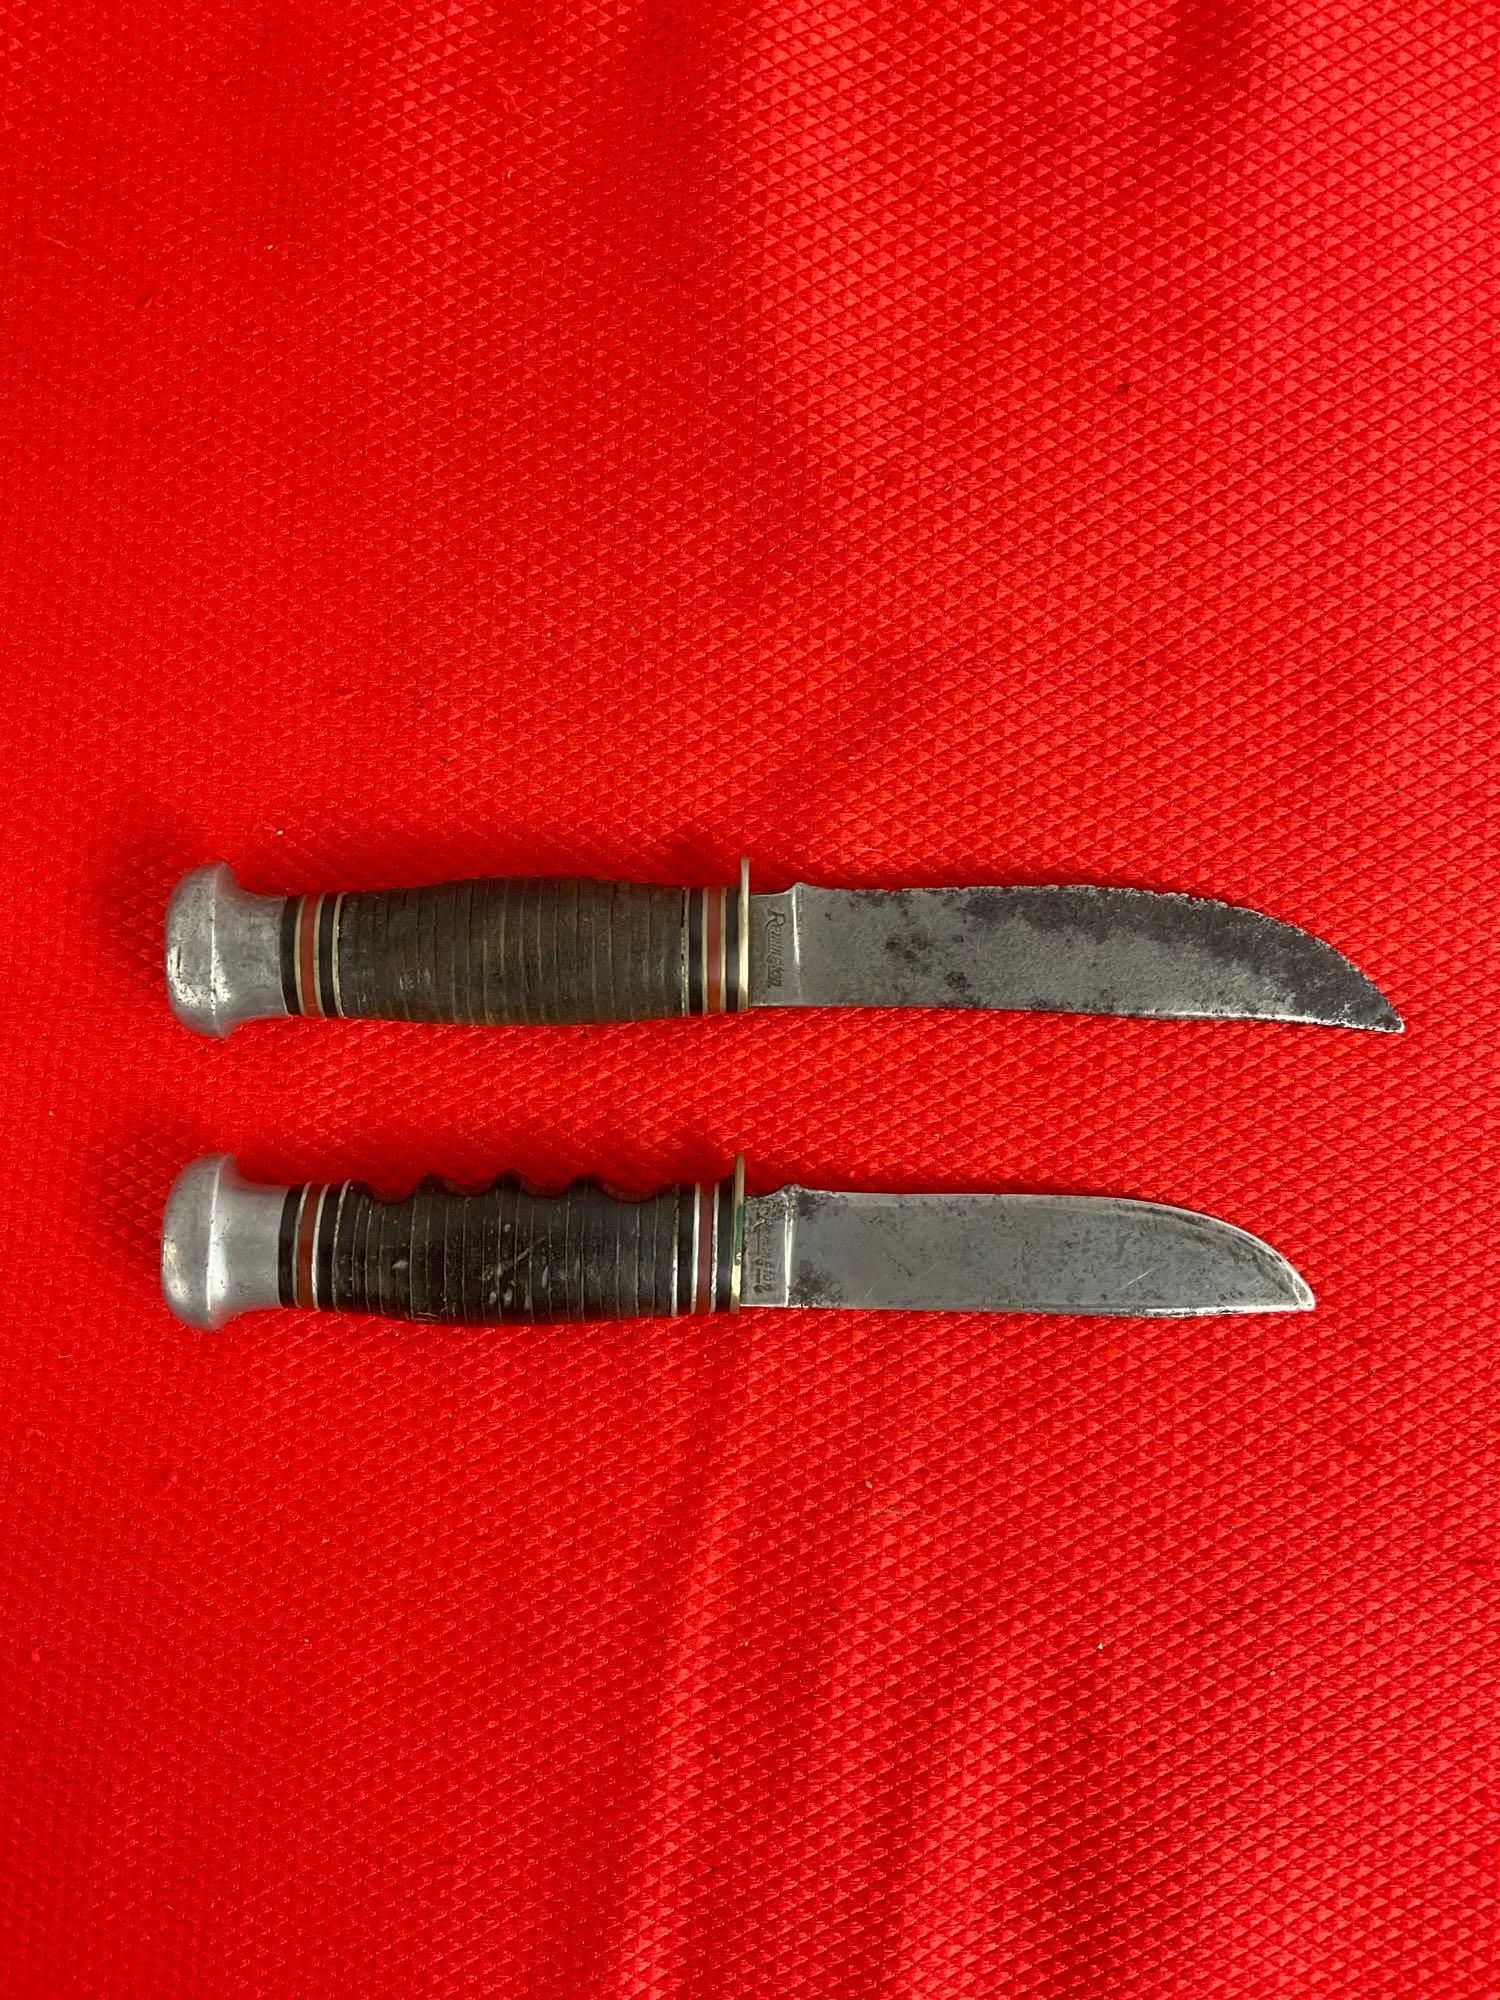 2 pcs Vintage Remington Steel Fixed Blade Boy Scout Knives Models R61 & R71. 1 Leather Sheath. See